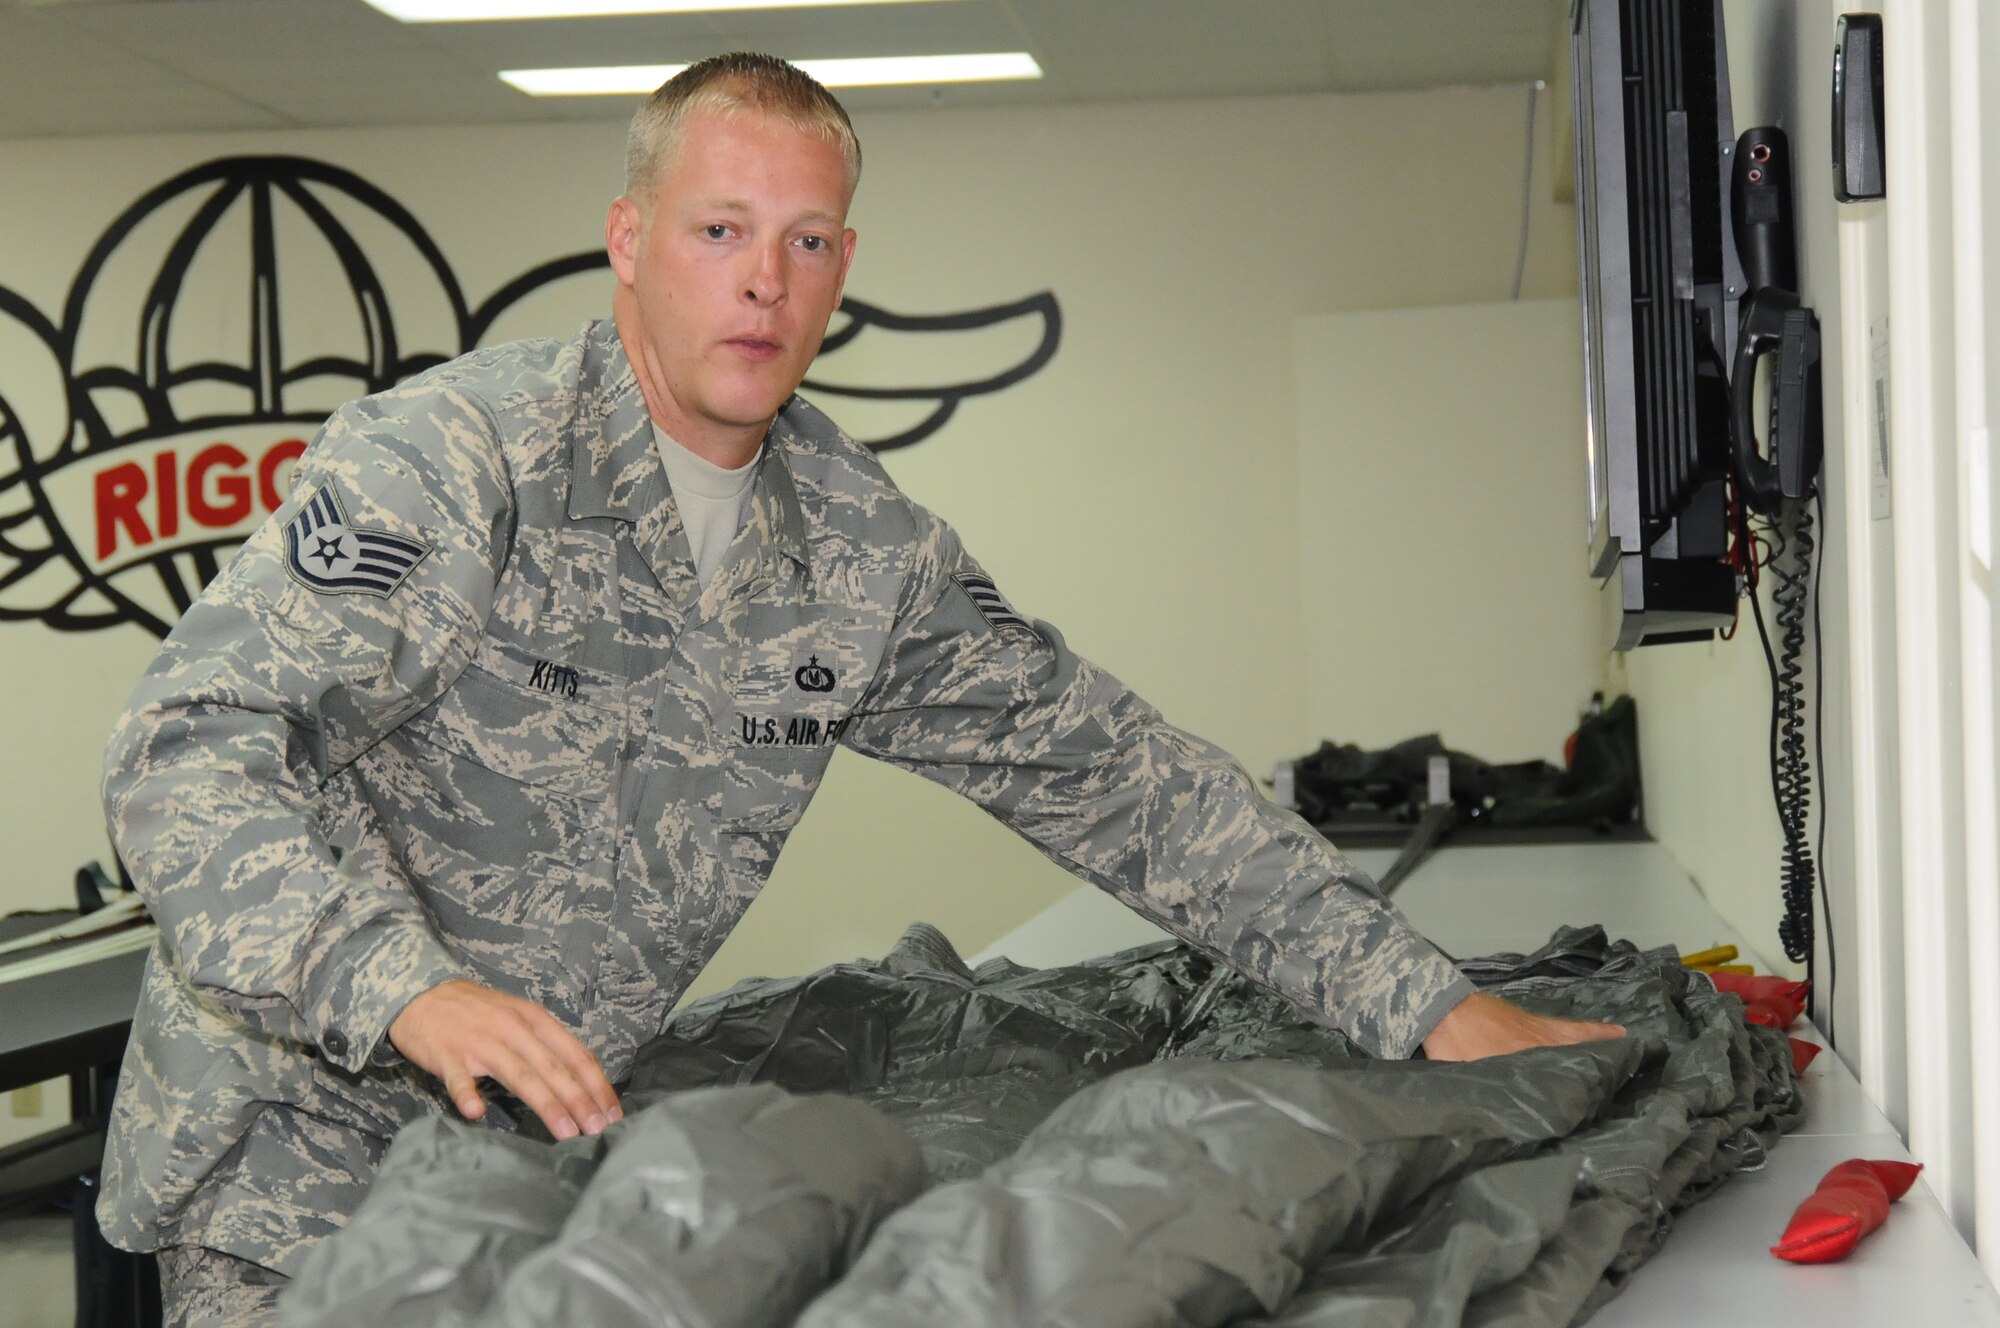 ANDERSEN AIR FORCE BASE, Guam – Staff Sgt. Christopher Kitts, 36th Operations Support Squadron aircrew flight equipment specialist flattens out the folded parachute prepping it for the final pack, Sept. 11. Every step of the packing procedure much be accomplished with 100 percent accuracy. (U.S. Air Force photo by Senior Airman Carlin Leslie)